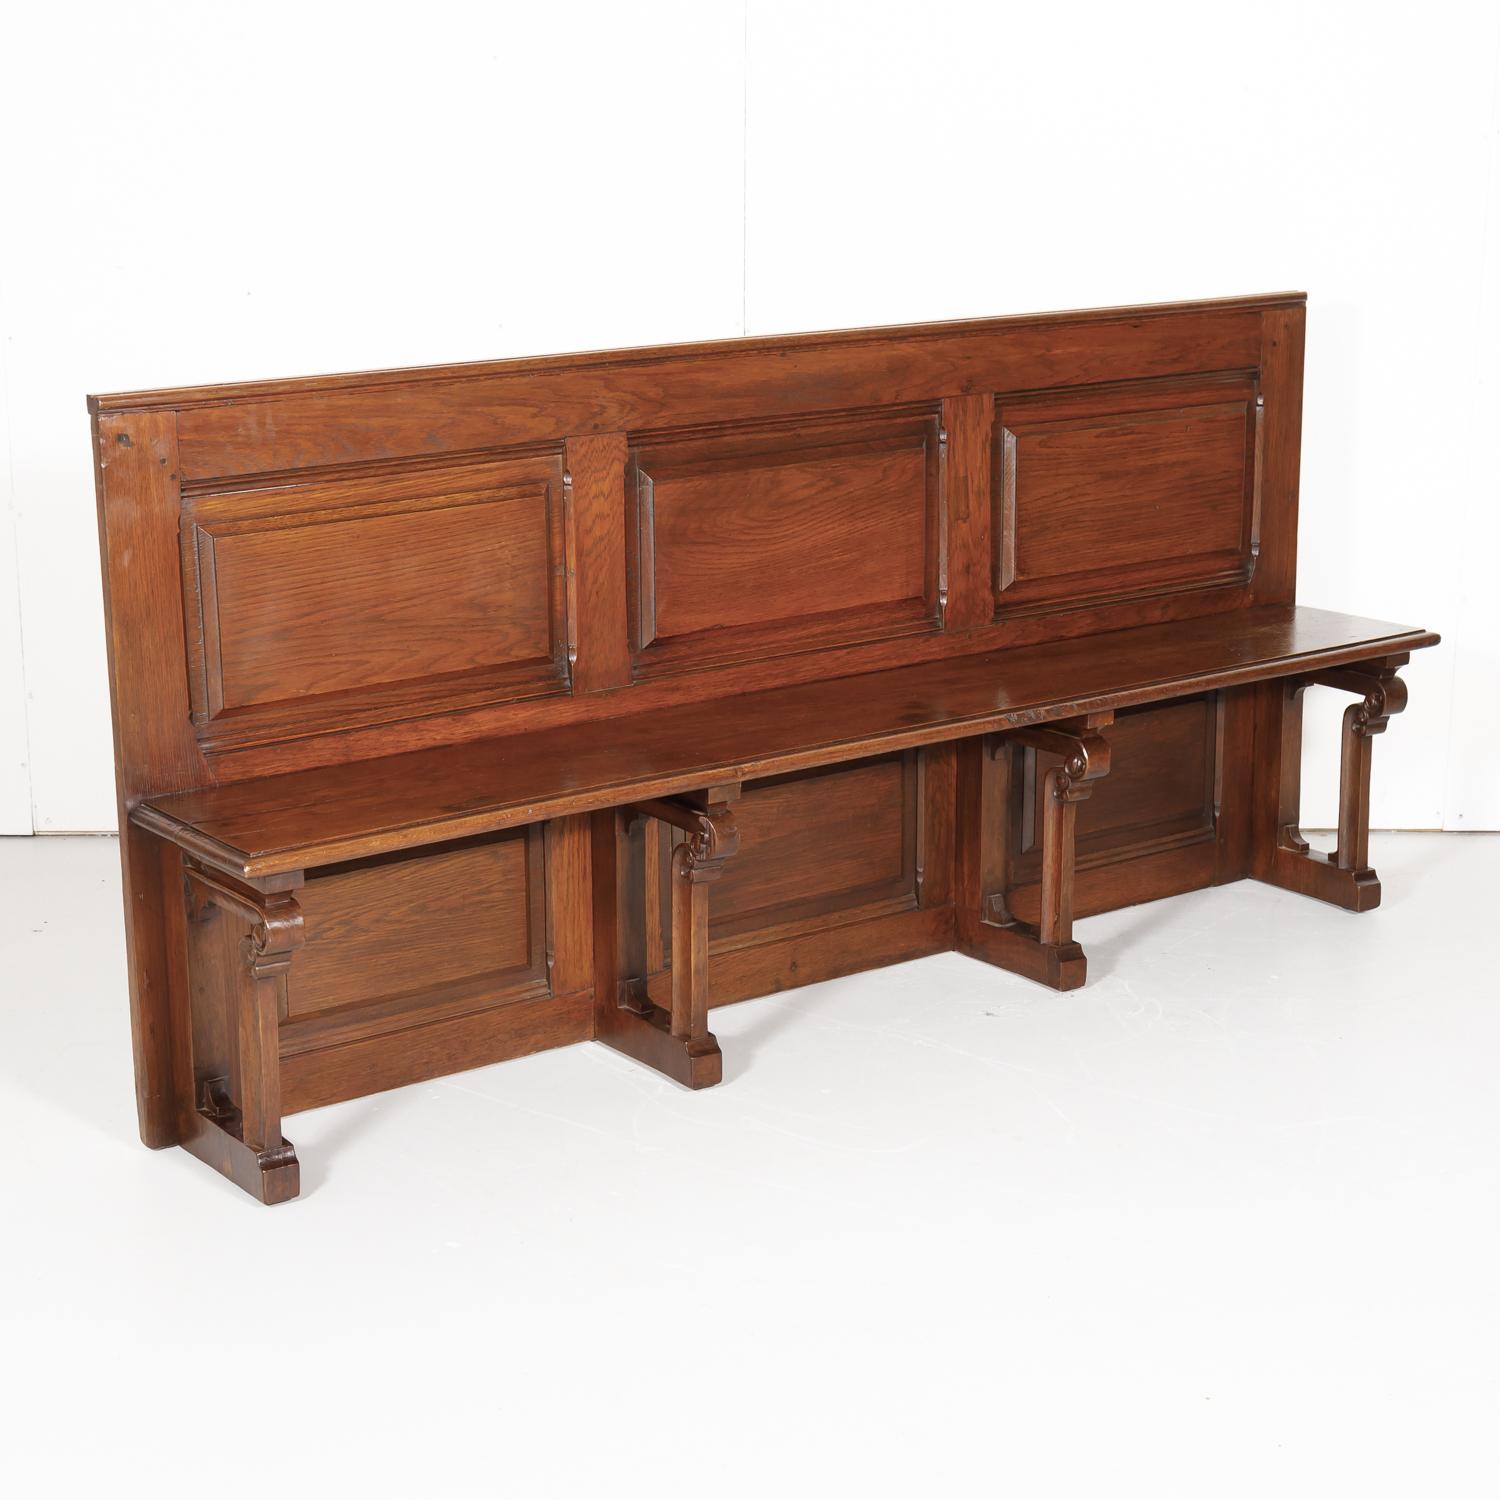 19th century antique French Gothic Revival period church pew or hall bench handcrafted near Saint Lô in Normandy from solid oak, circa 1880s. This large church pew features three raised panels on the back with three matching panels below the seat.